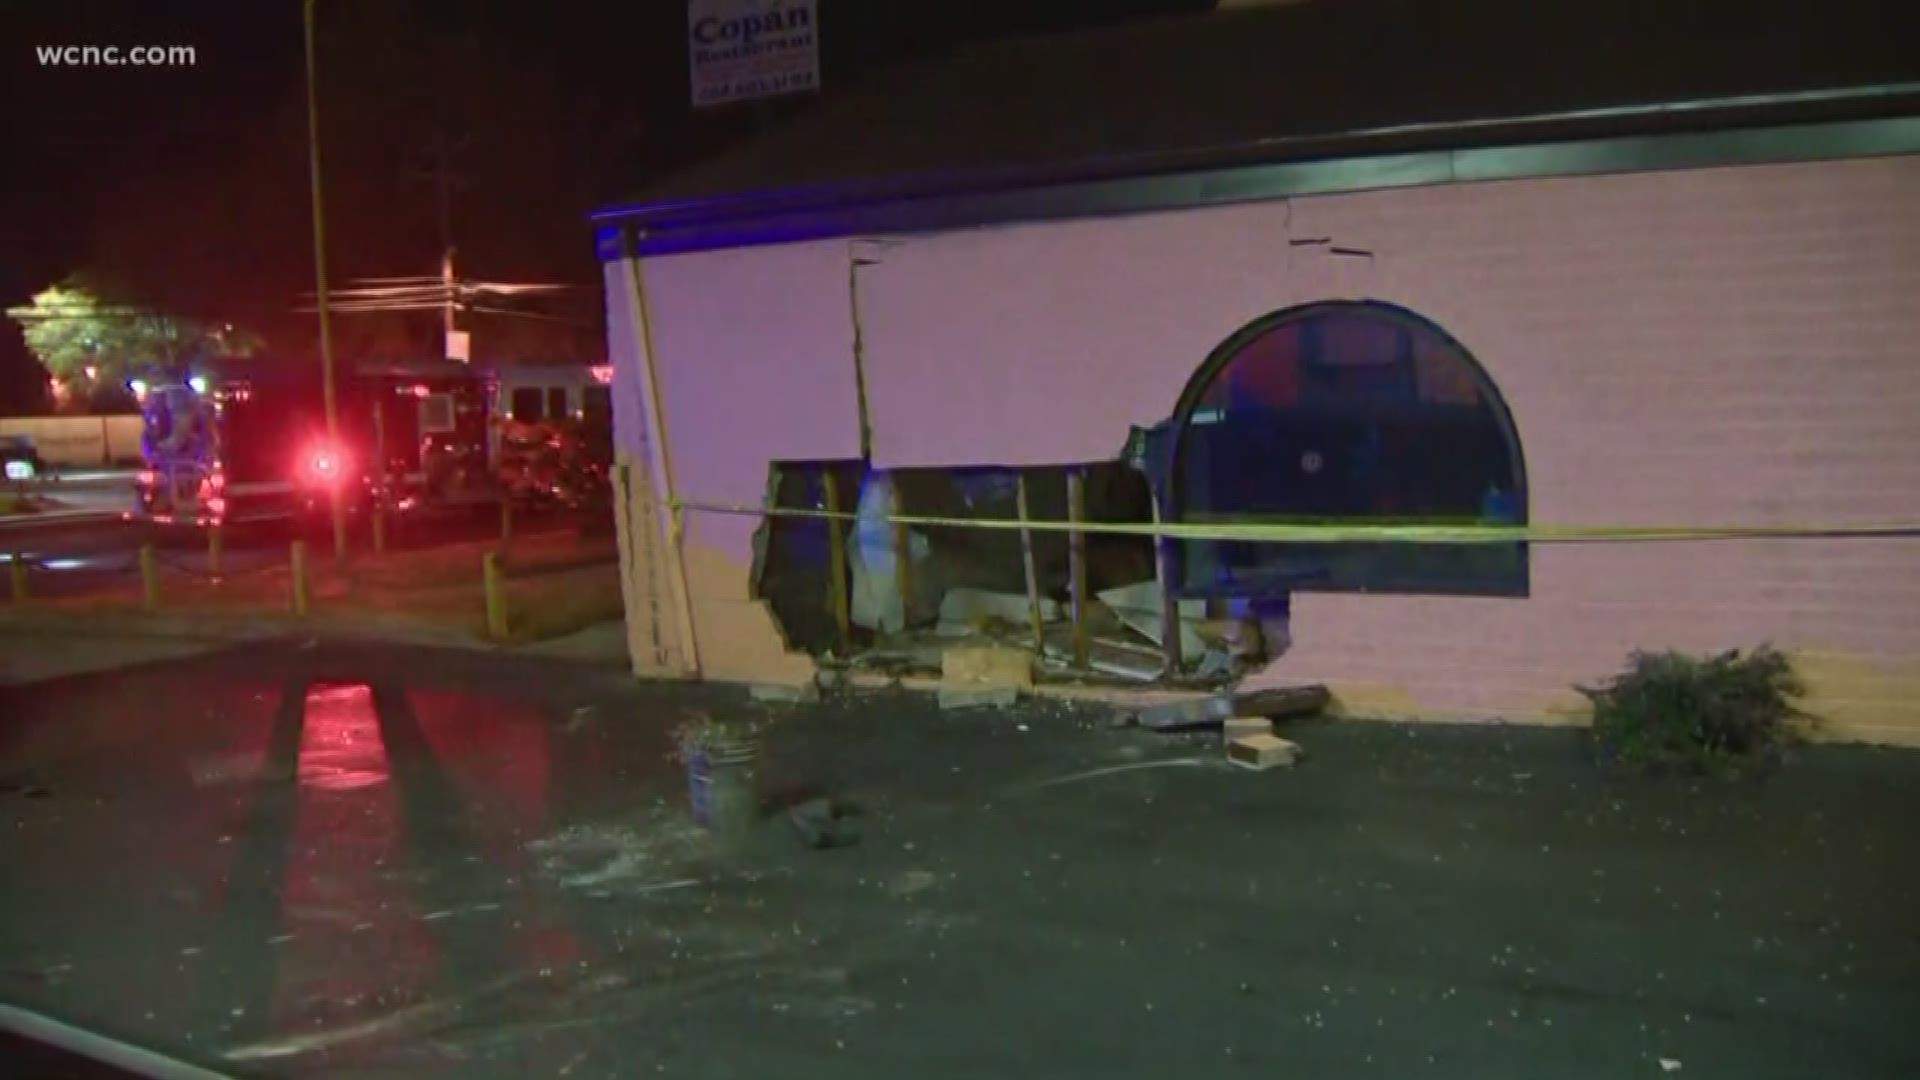 Charlotte-Mecklenburg Police said a car hit another vehicle in the drive-thru at Captain D's, then crashed into the neighboring Copan Restaurant.